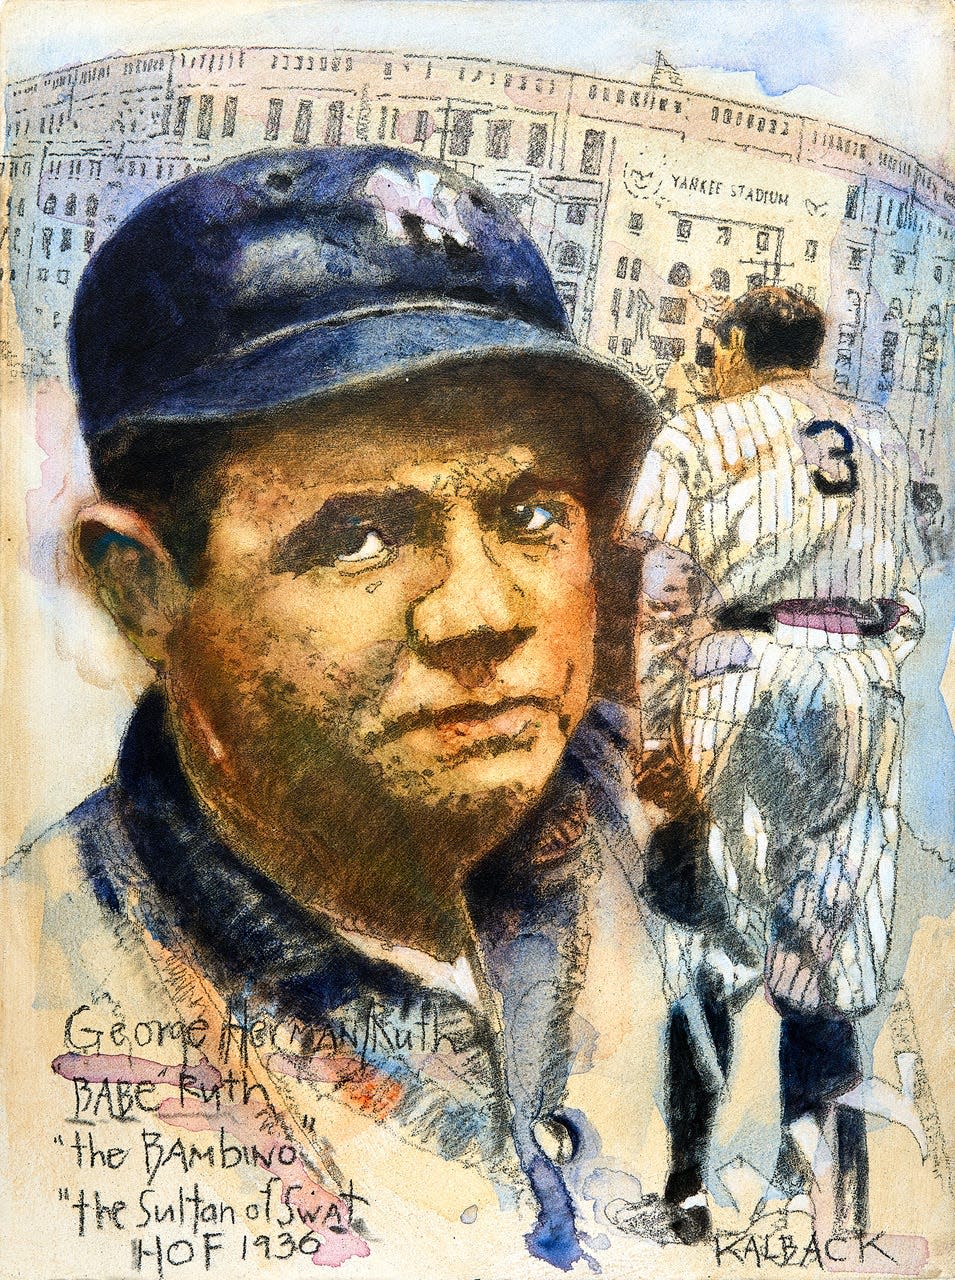 This piece featuring George Herman "Babe" Ruth is part of an exhibit of artwork from Jerry Kalback (1950–2021). Kalback's piece, in acrylic and pencil on gesso board, is on loan from the School of Art Collection and Galleries at Kent State University.